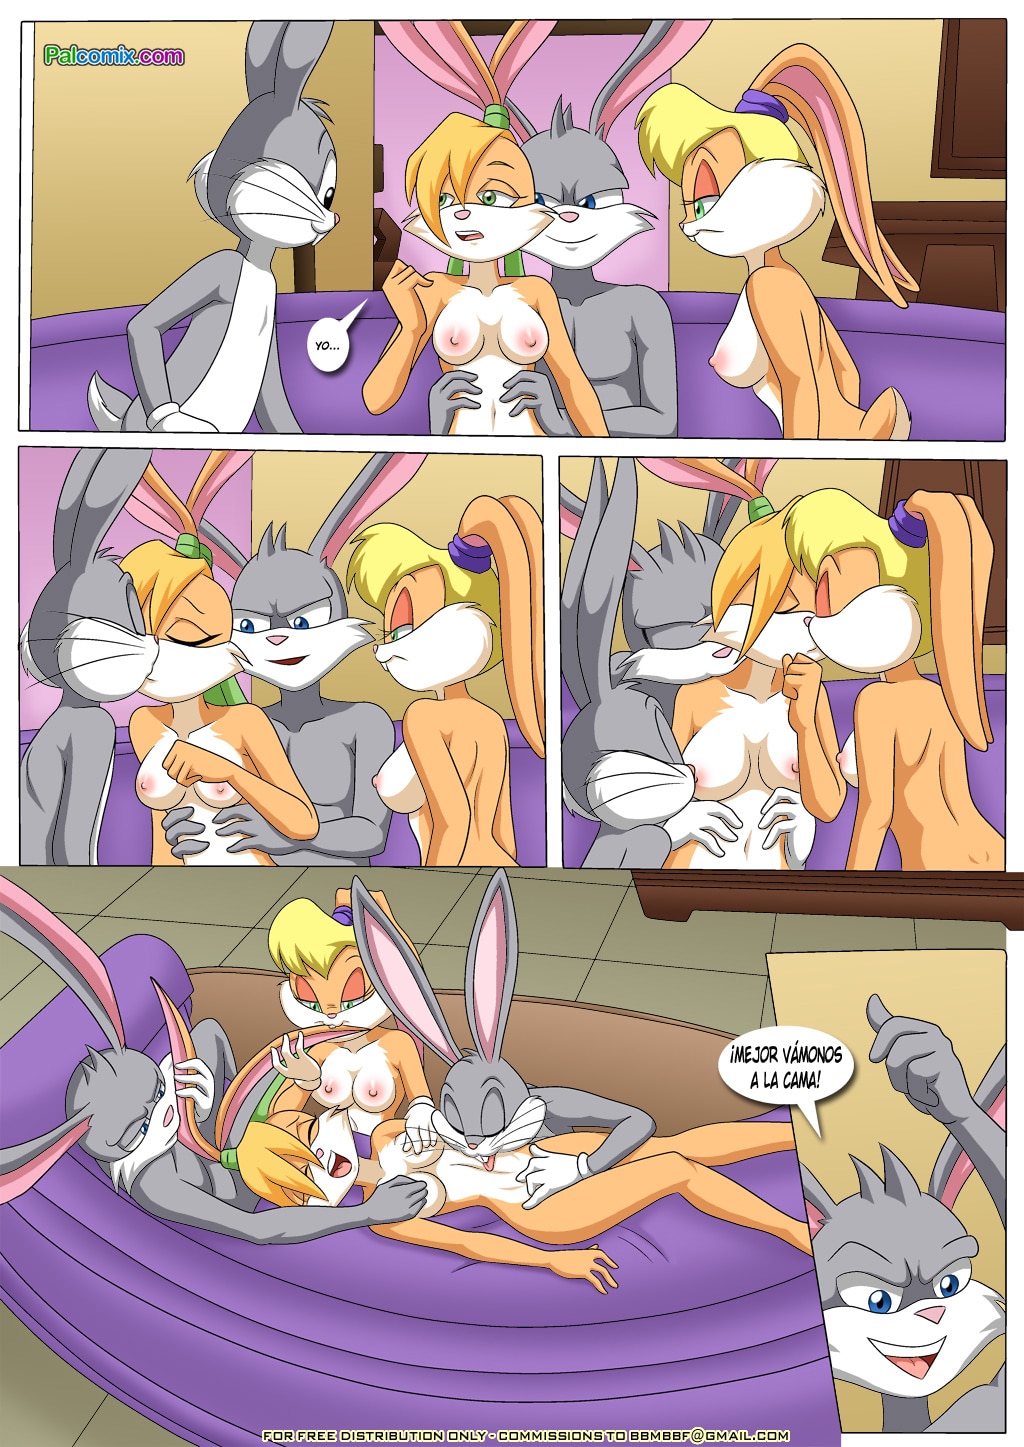 [Palcomix] Time Crossed Bunnies #2 - 7